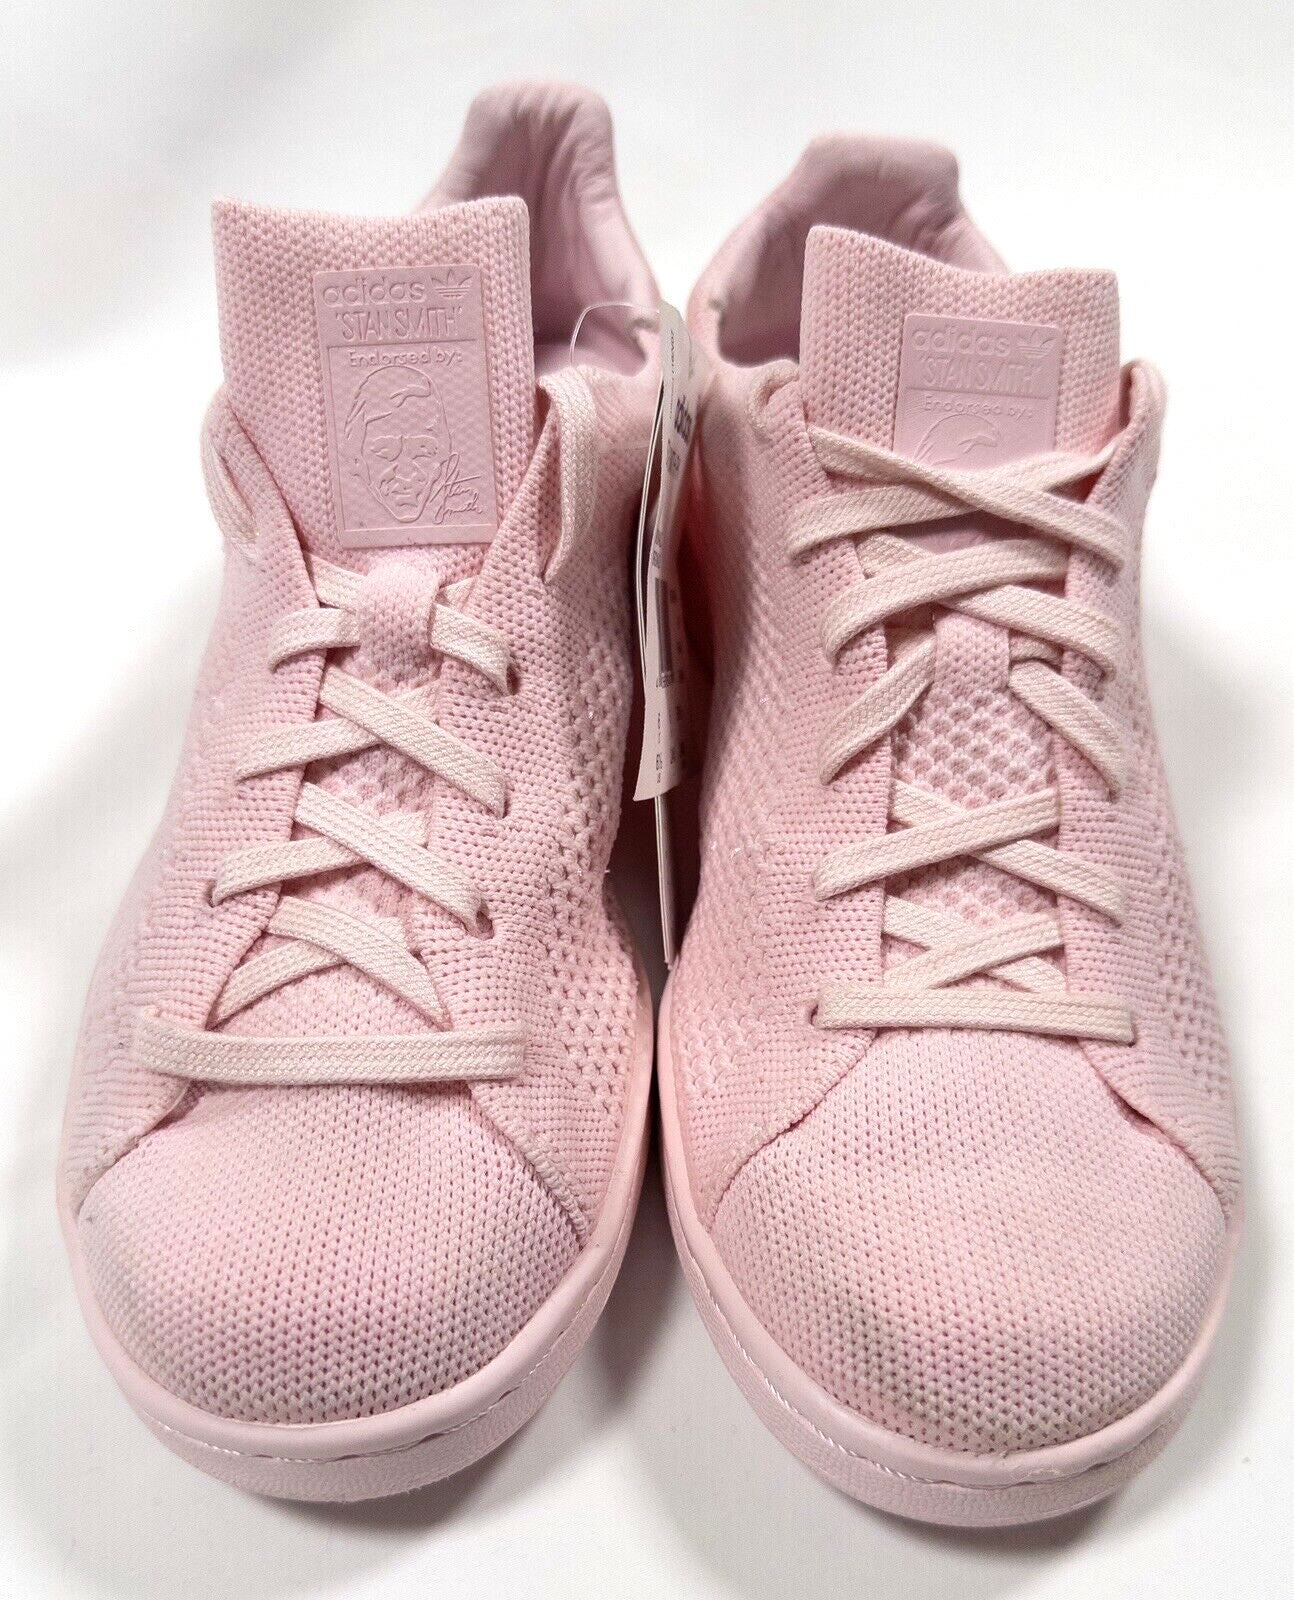 Adidas Stan Smith Trainers Shoes Pink Limited Edition Women's Size UK 5